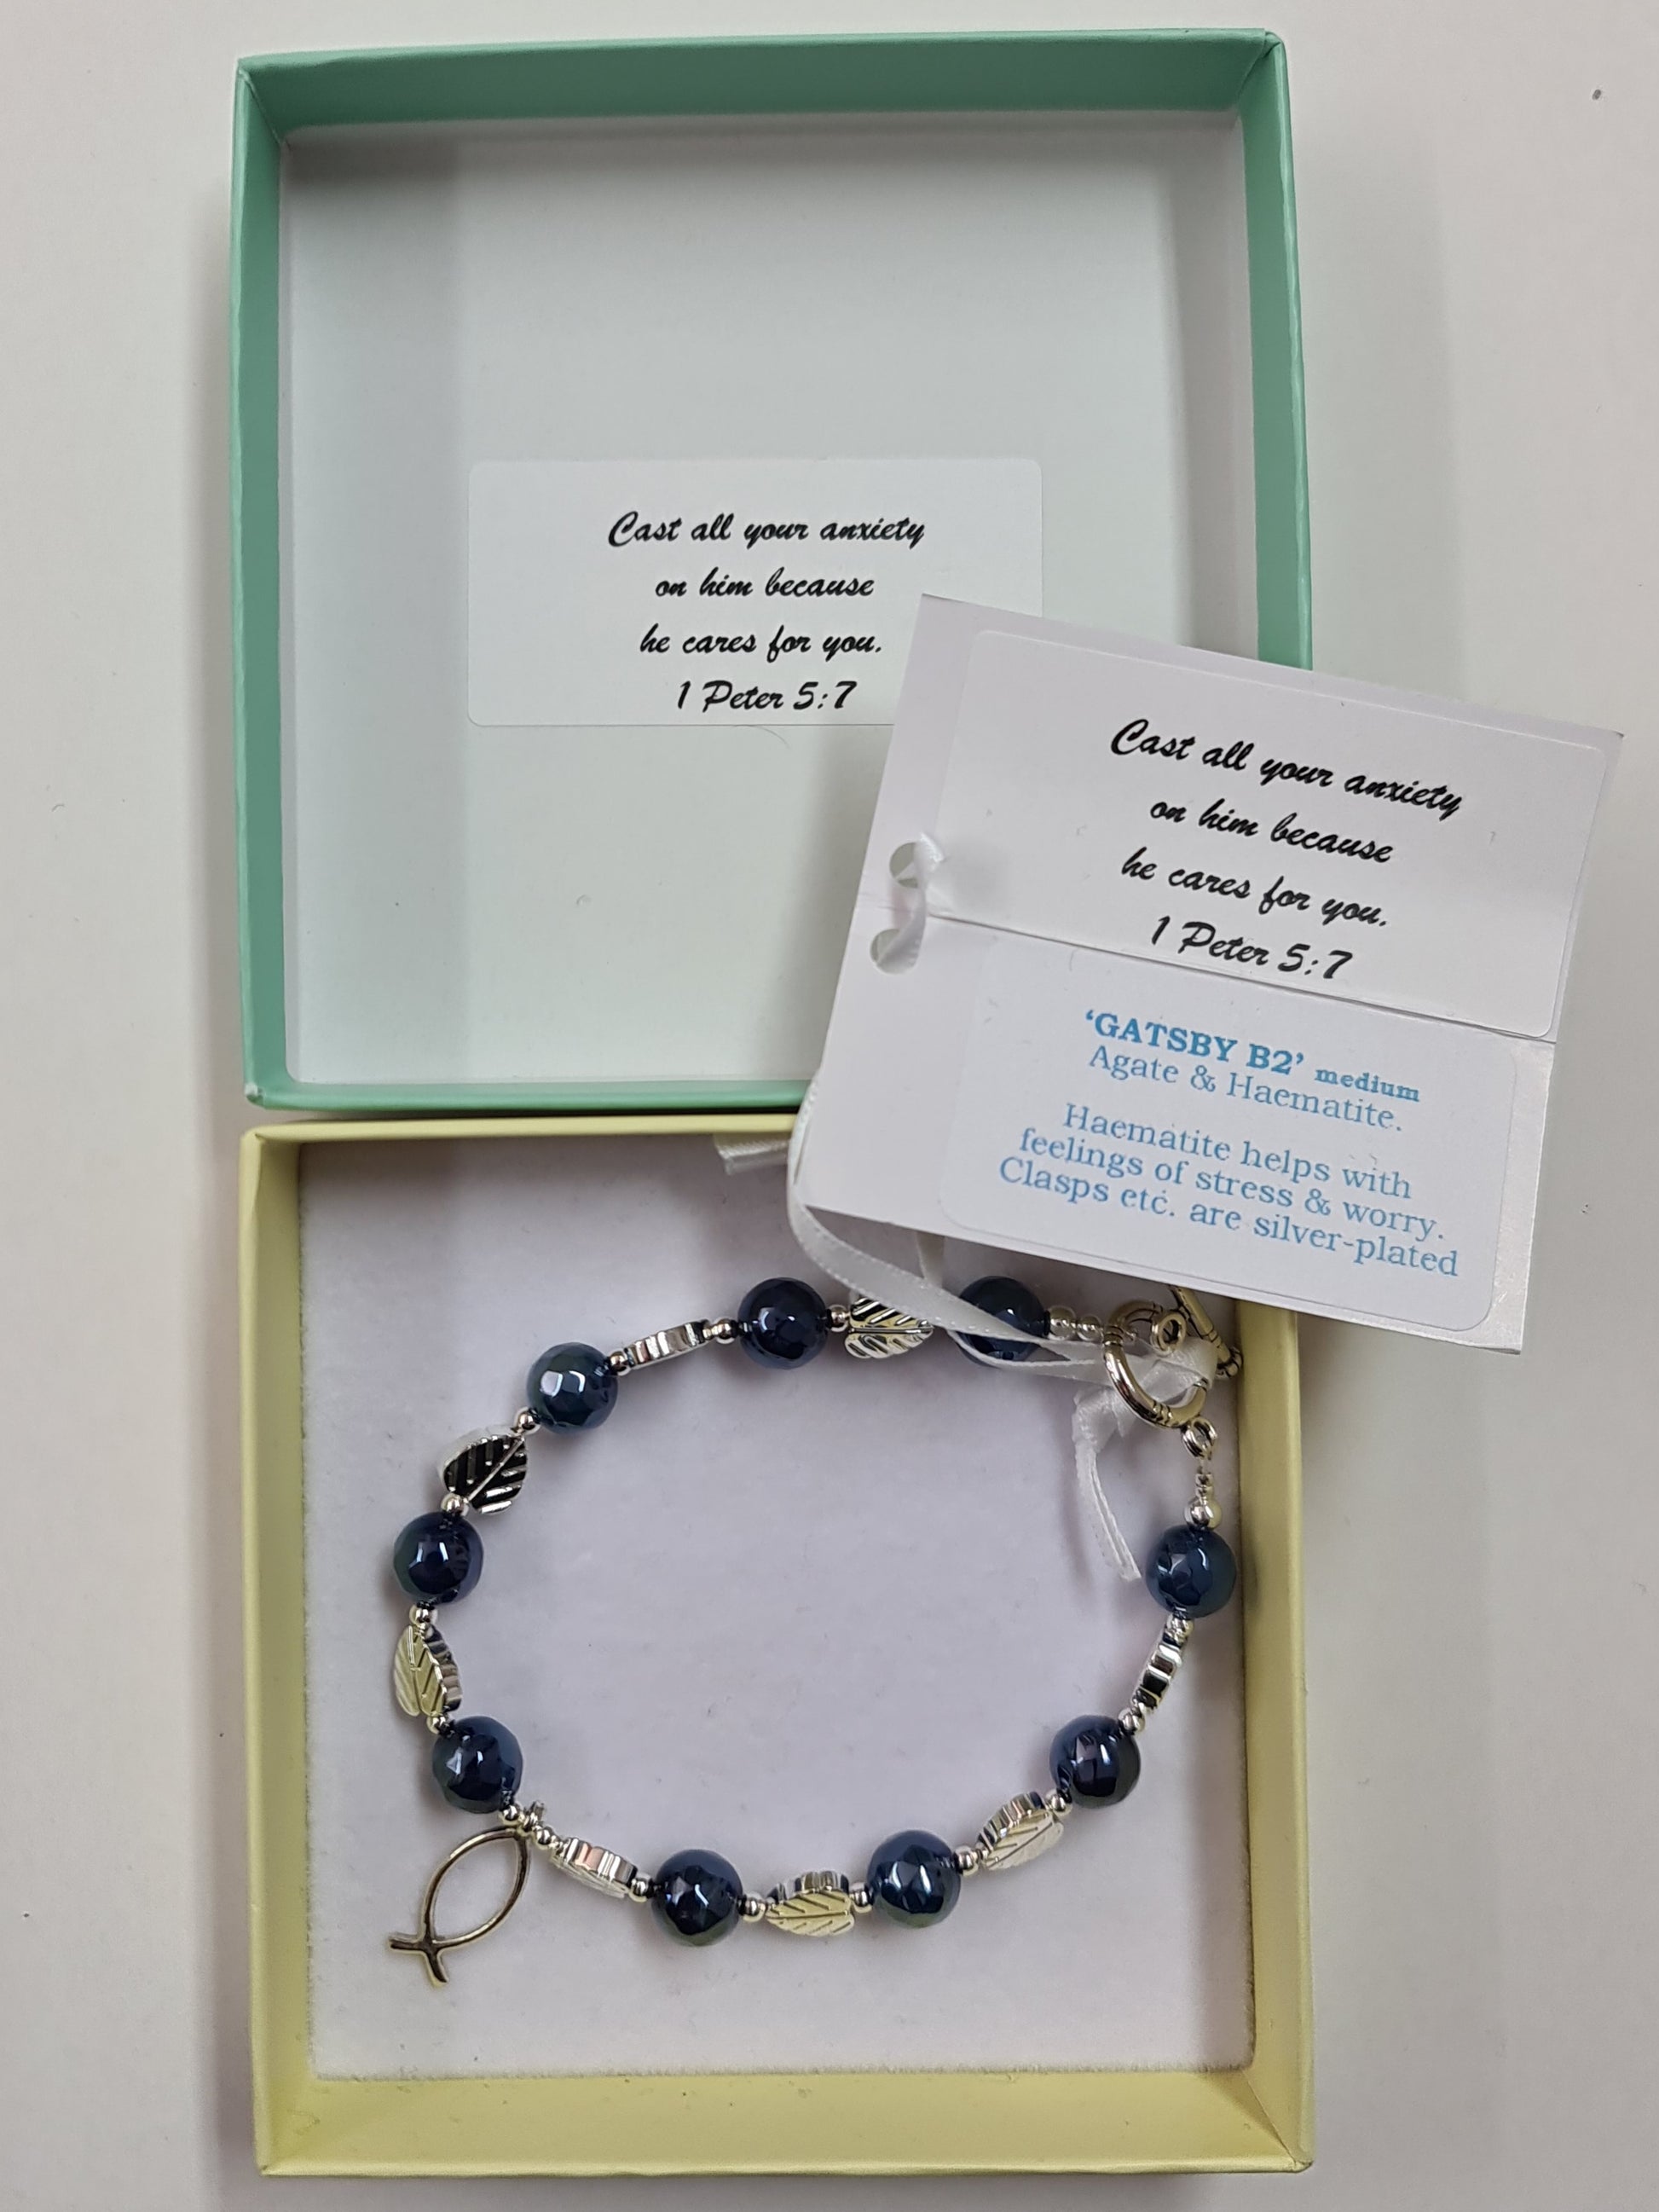 Cast all your anxiety beaded bracelet - The Christian Gift Company